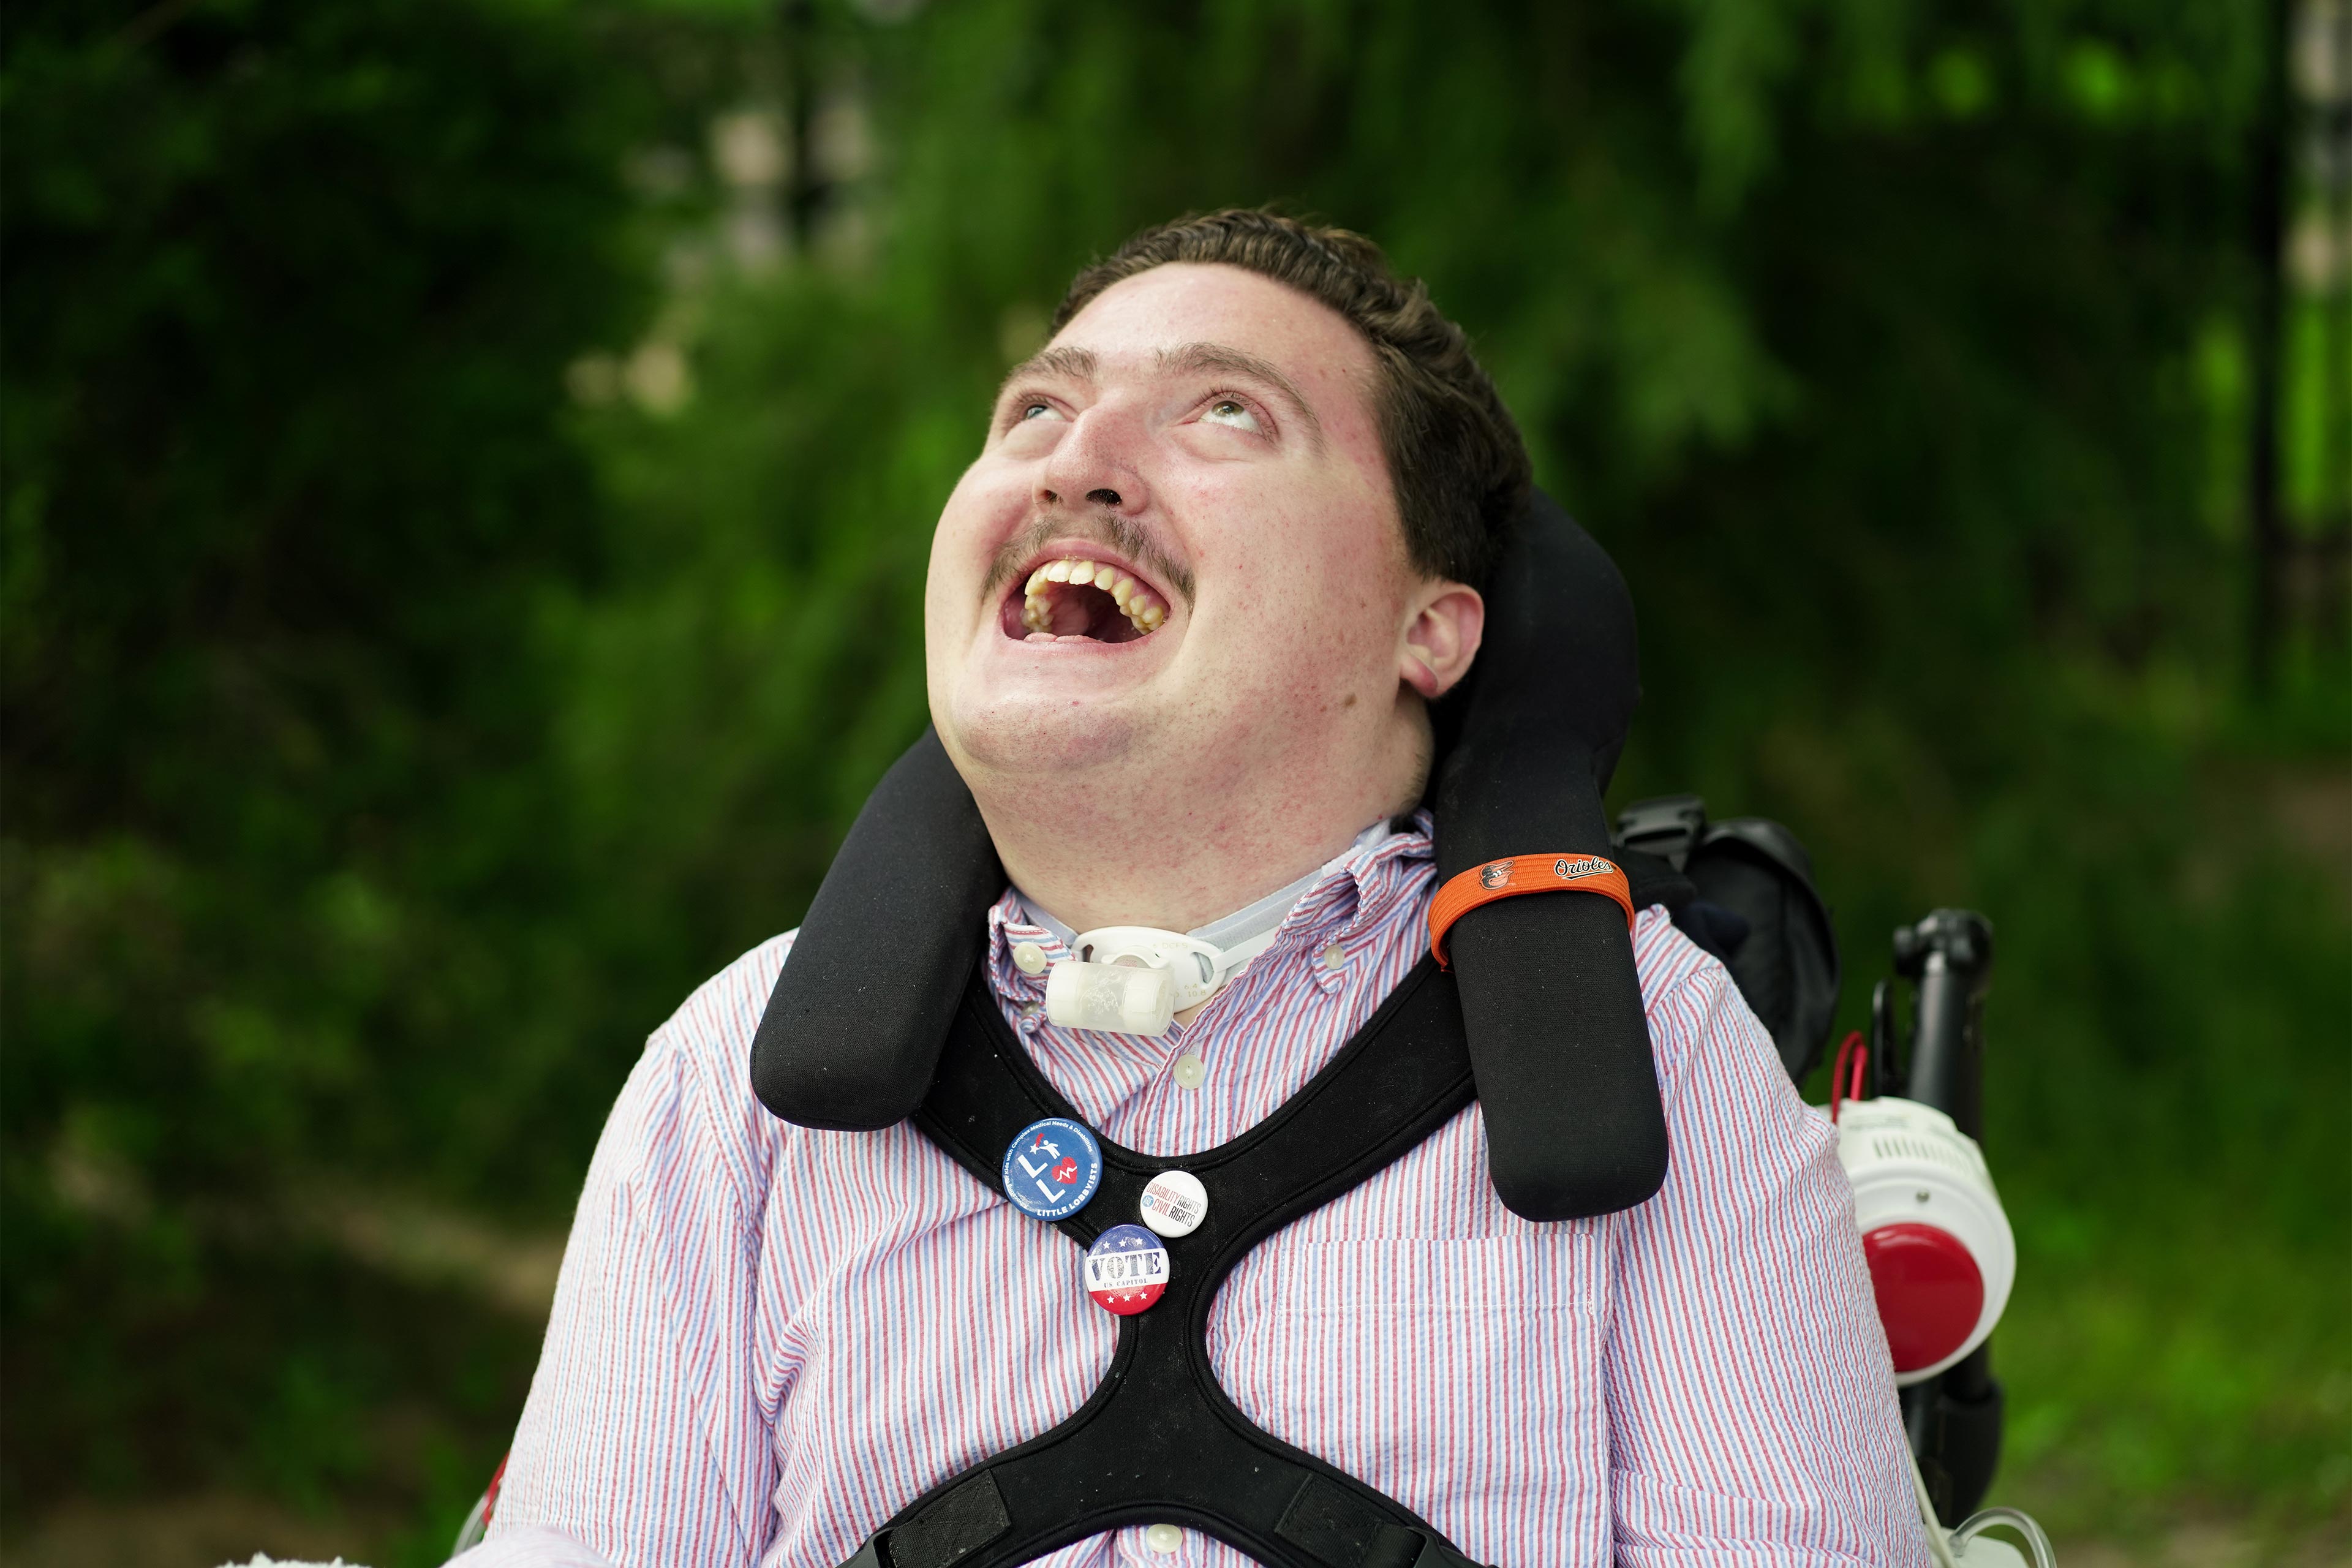 A photo shows Rob Stone posing for a portrait outside. He is sitting in a wheelchair.